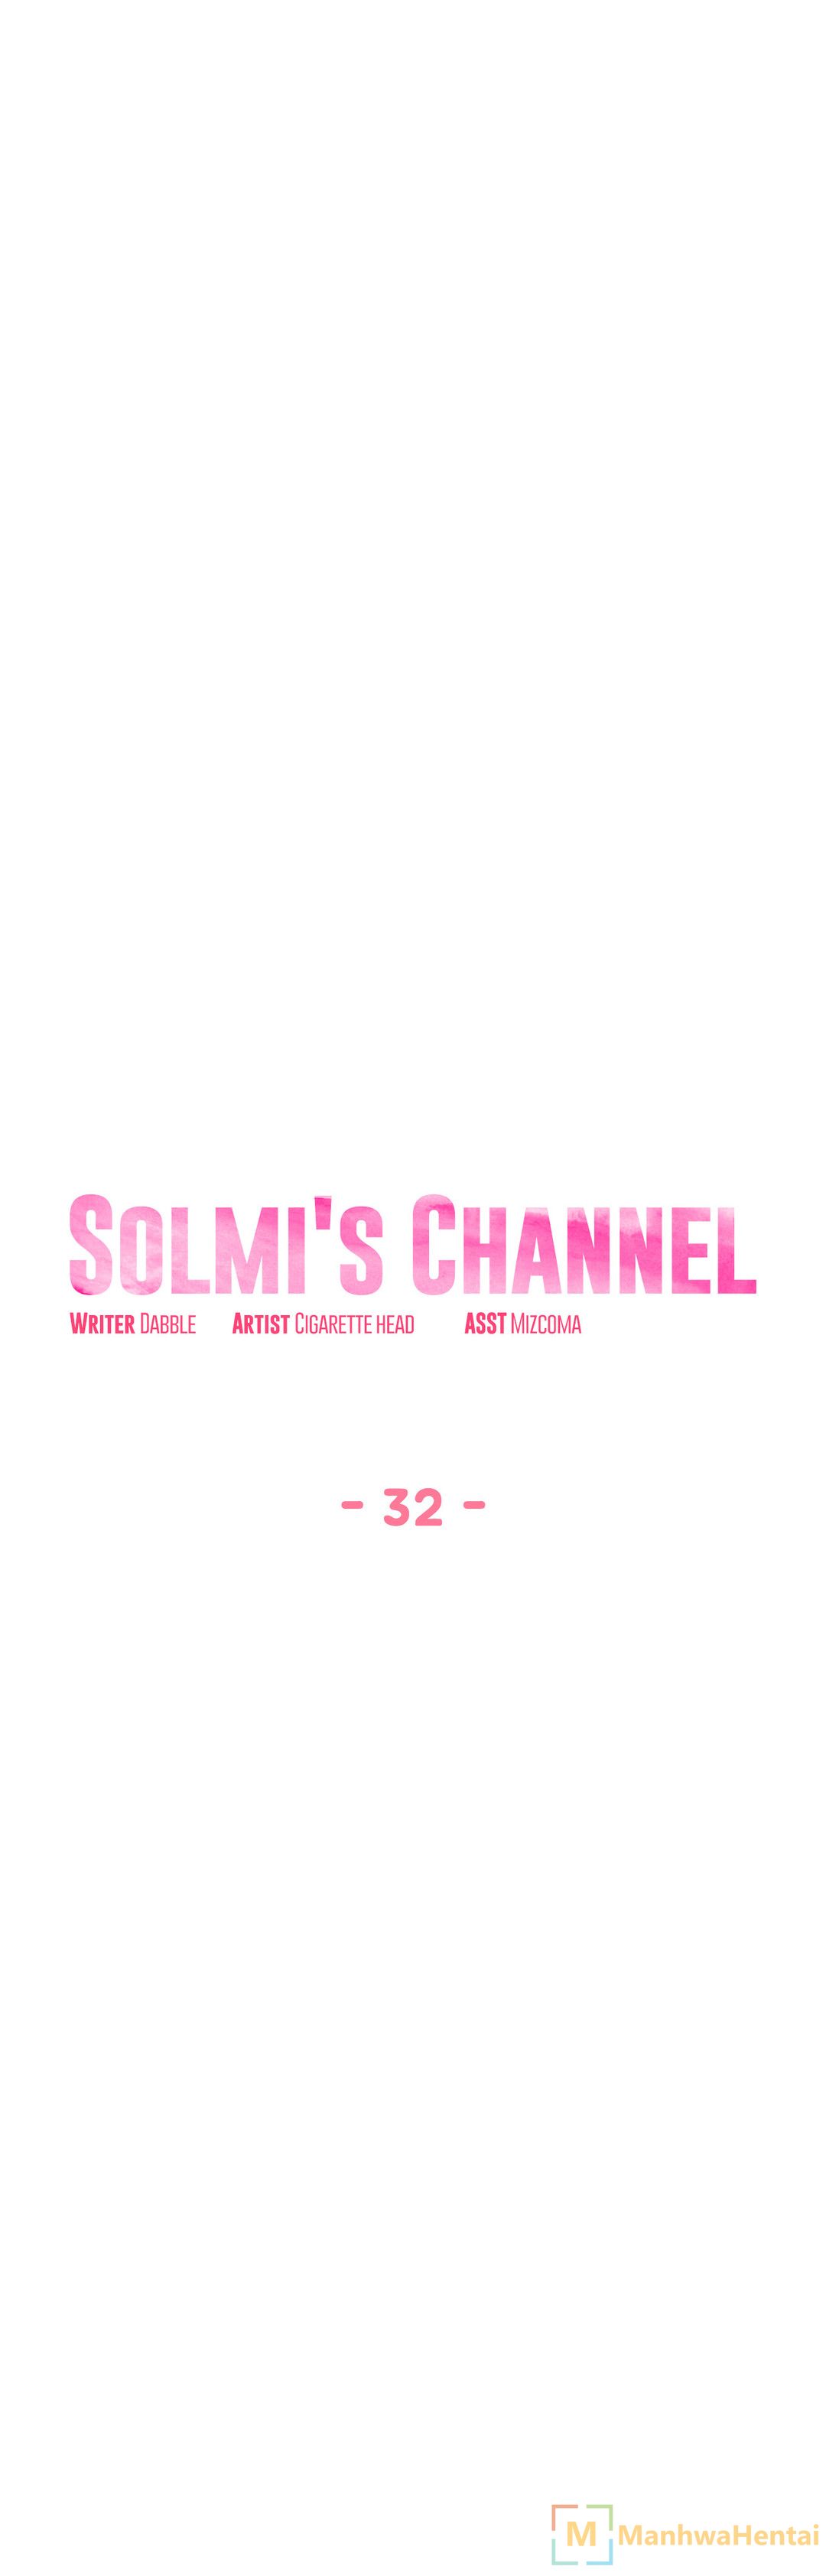 Solmi’s Channel image